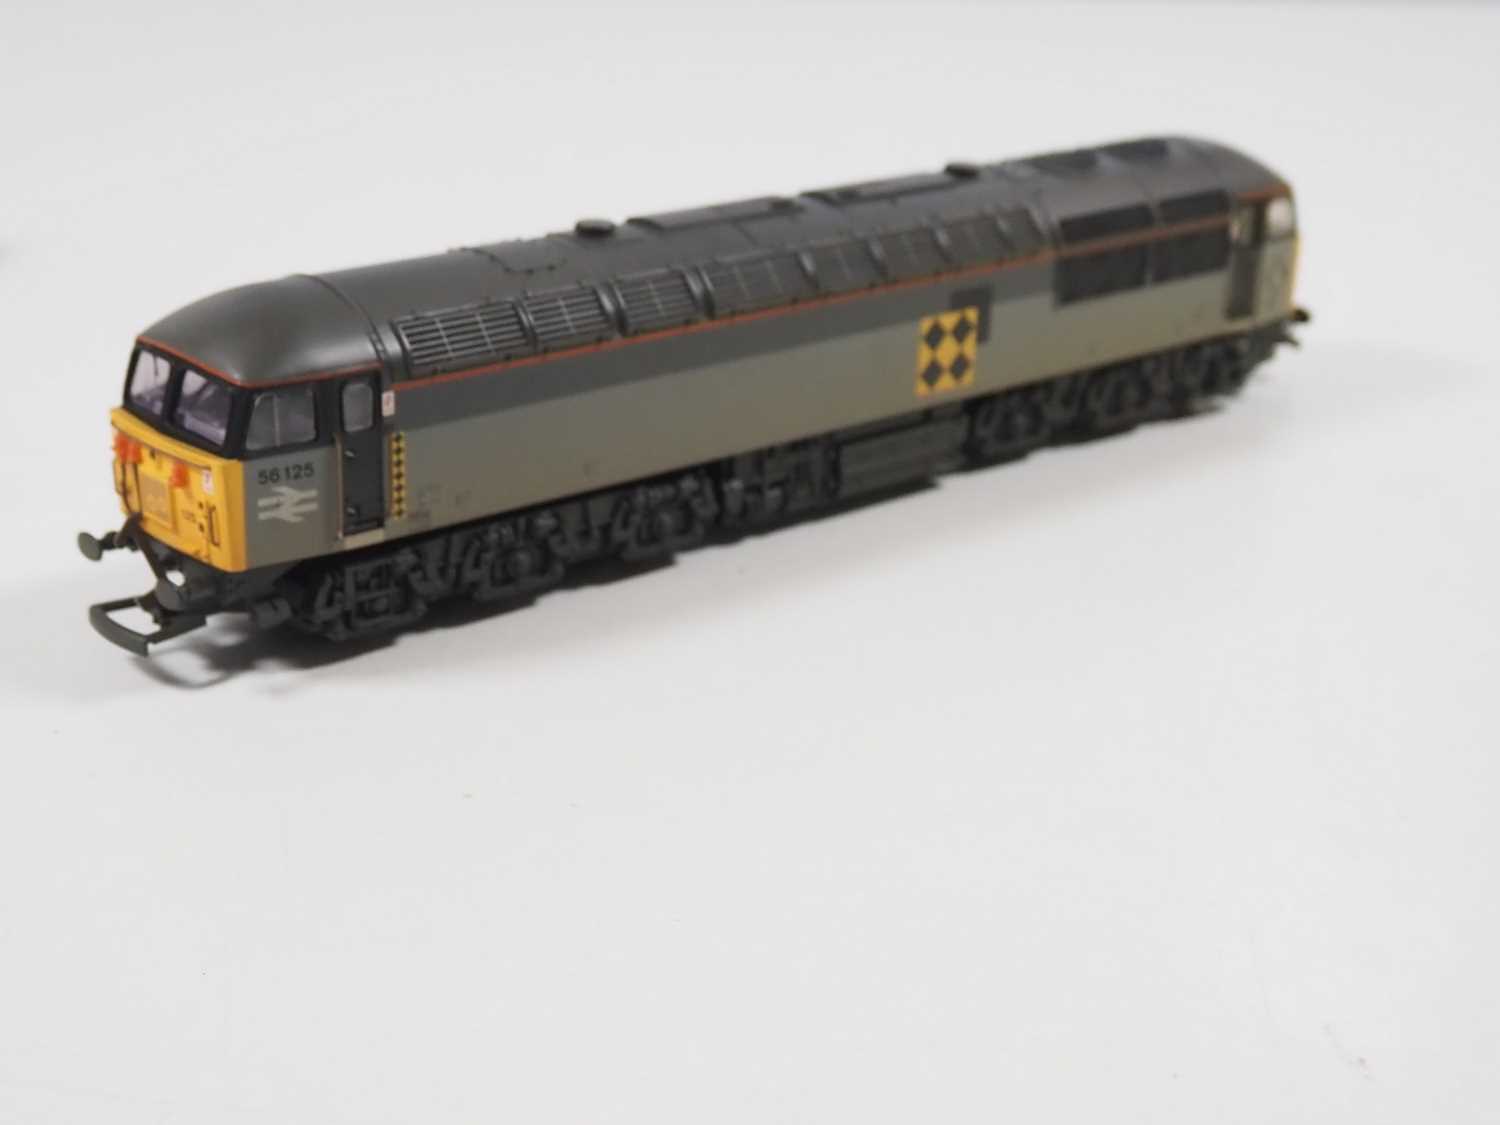 A HORNBY Class 56 diesel locomotive in Railfreight Coal Sector livery in original box together - Image 5 of 6